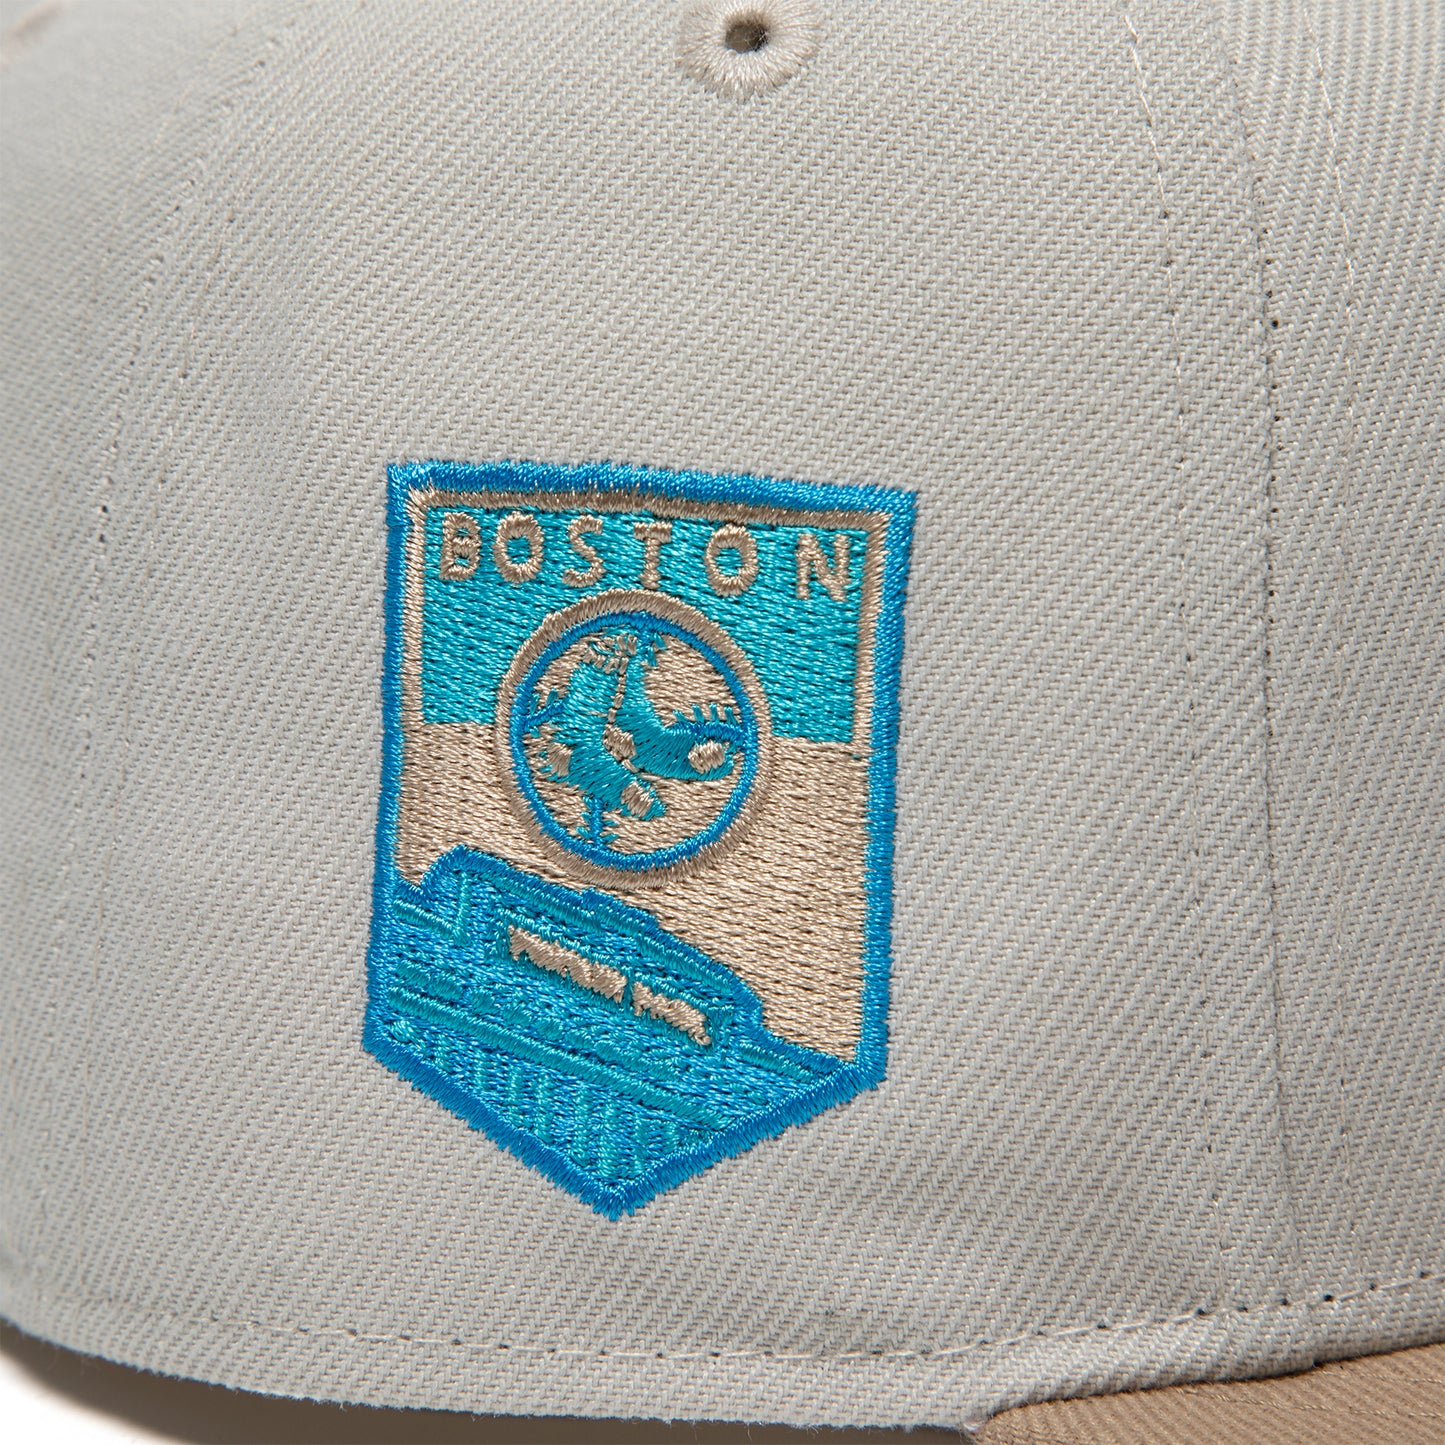 Concepts x New Era 5950 Boston Red Sox Fitted Hat (Stone/Vice Blue)